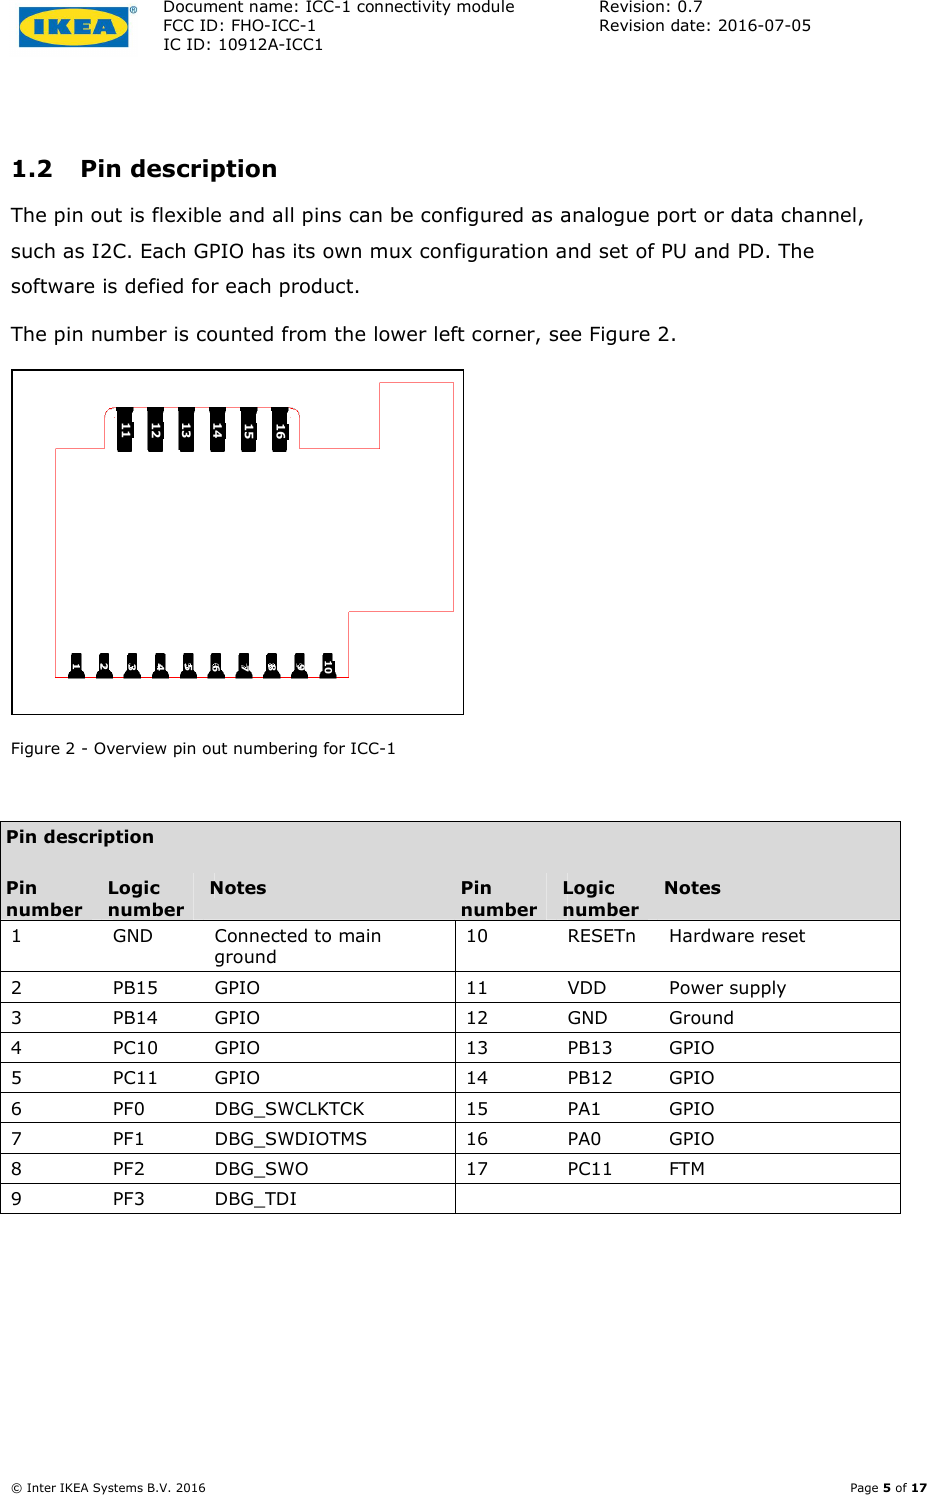 Document name: ICC-1 connectivity module  Revision: 0.7 FCC ID: FHO-ICC-1  Revision date: 2016-07-05  IC ID: 10912A-ICC1     © Inter IKEA Systems B.V. 2016    Page 5 of 17  1.2 Pin description The pin out is flexible and all pins can be configured as analogue port or data channel, such as I2C. Each GPIO has its own mux configuration and set of PU and PD. The software is defied for each product. The pin number is counted from the lower left corner, see Figure 2.  Figure 2 - Overview pin out numbering for ICC-1  Pin description  Pin number Logic number Notes  Pin number Logic number Notes 1  GND  Connected to main ground  10  RESETn  Hardware reset 2  PB15  GPIO  11  VDD  Power supply 3  PB14  GPIO  12  GND  Ground 4  PC10  GPIO  13  PB13  GPIO 5  PC11  GPIO  14  PB12  GPIO 6  PF0  DBG_SWCLKTCK  15  PA1  GPIO 7  PF1  DBG_SWDIOTMS  16  PA0  GPIO 8  PF2  DBG_SWO  17  PC11  FTM  9  PF3  DBG_TDI        11 12 13 14 15 16 1 2 3 4 5 6 7 8 9 10 